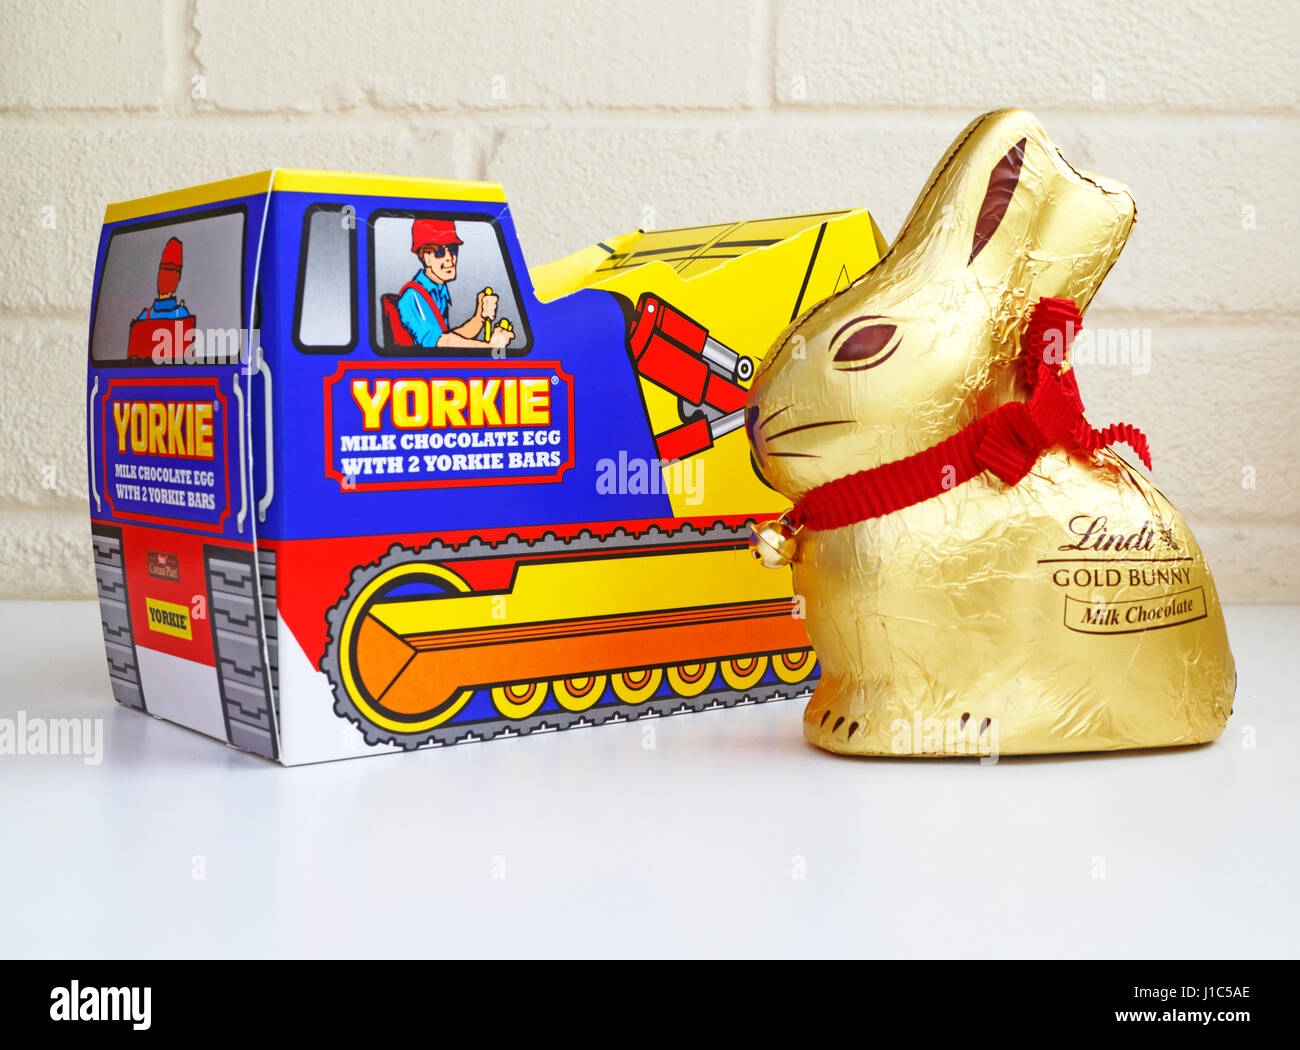 A Yorkie Easter Egg and Lindt milk chocolate gold bunny bought as presents at Easter. Stock Photo